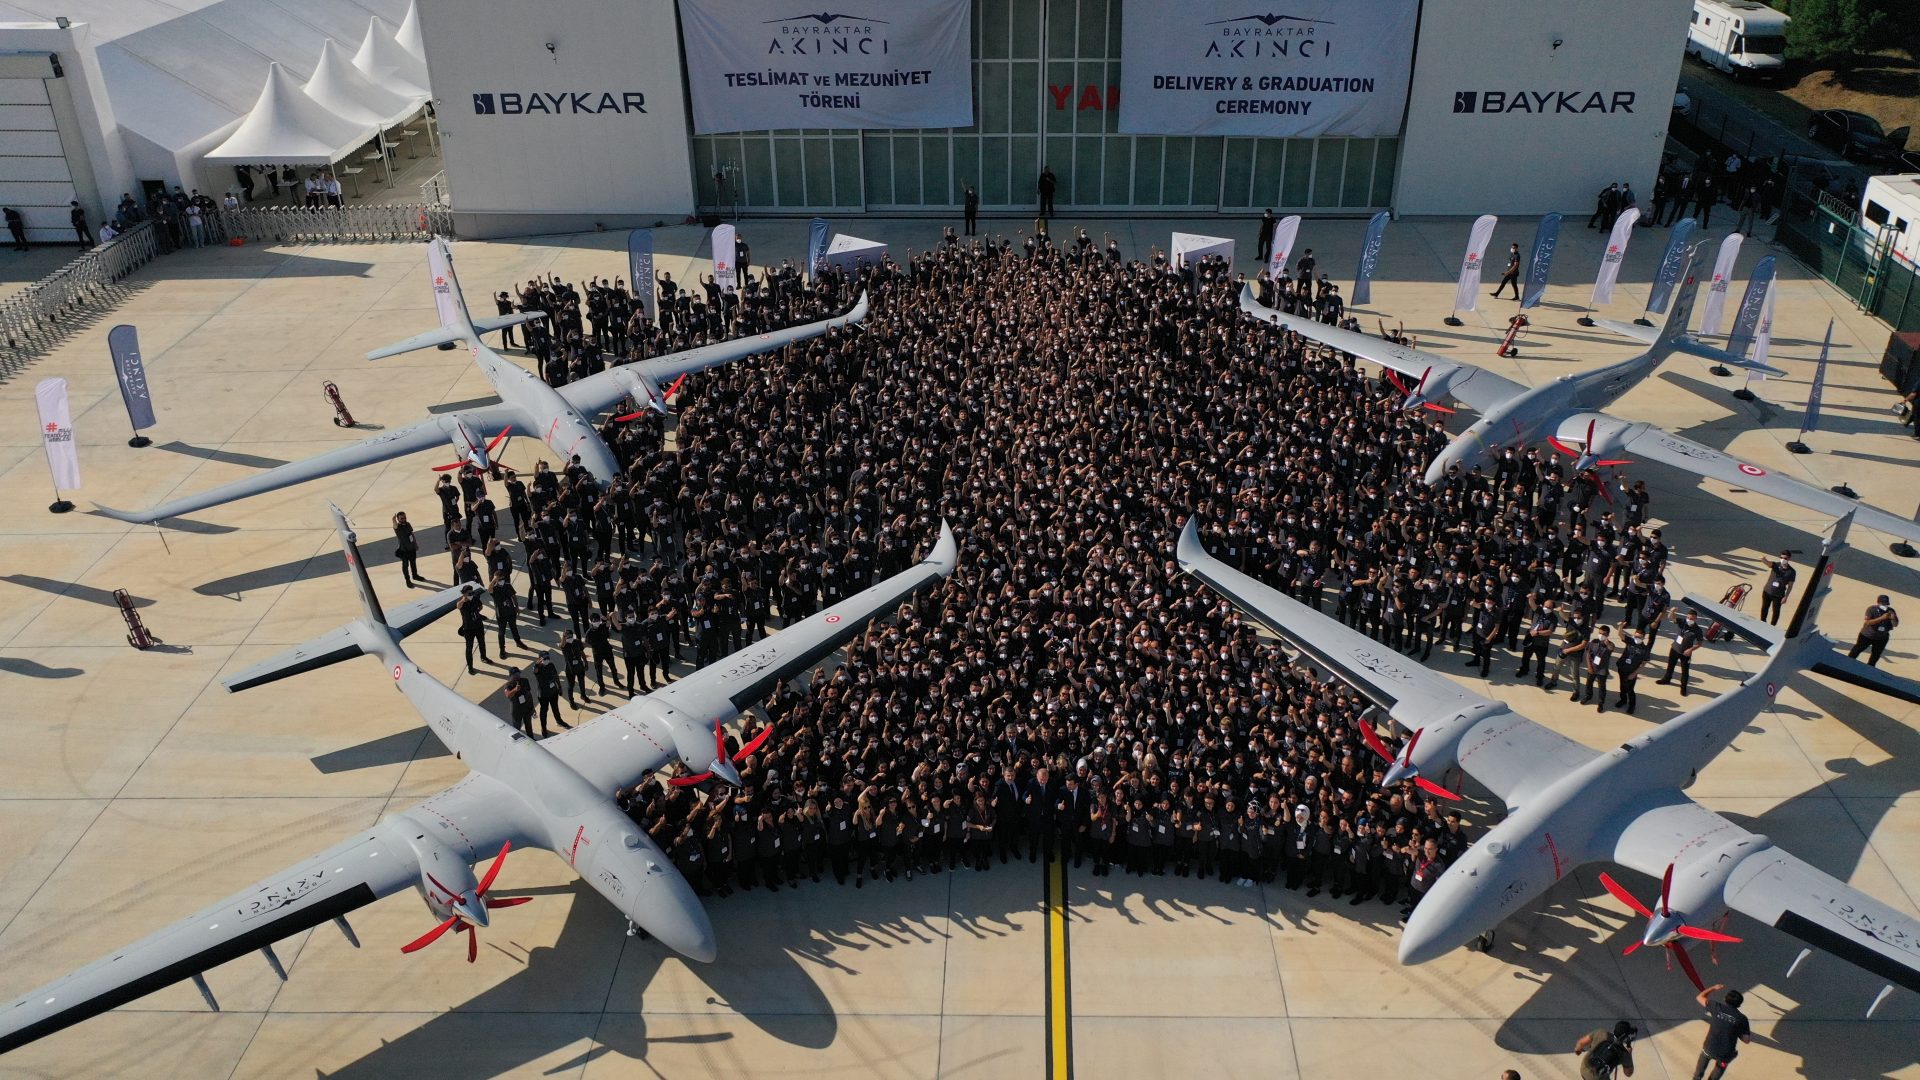 A crowd, including president Recep Tayyip Erdogan at a launch ceremony for the country’s Bayraktar drones, August 2021 Below, Erdoğan makes a speech in Ankara on March 3 as he tries to maintain relationships with both Russia and Ukraine. Photo: Anadolu/Getty Images; Murat Kurat/Getty Images